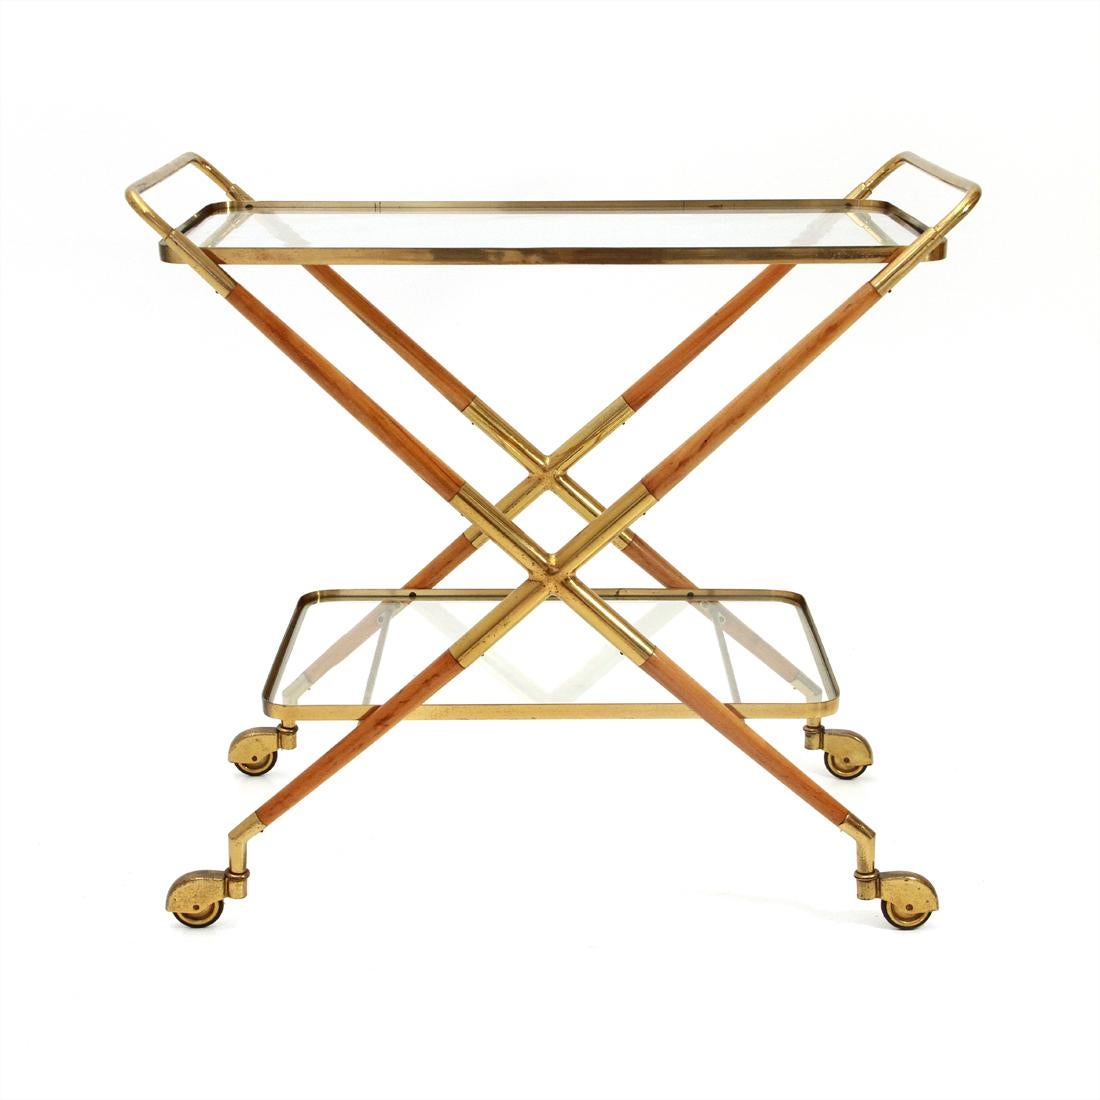 Cart of Italian manufacture from the 1950s.
Structure made of brass and wood elements.
Glass tops. Brass wheels.
Good general conditions, some signs due to normal use over time

Dimensions: Width 74 cm, depth 42 cm, height 68 cm.